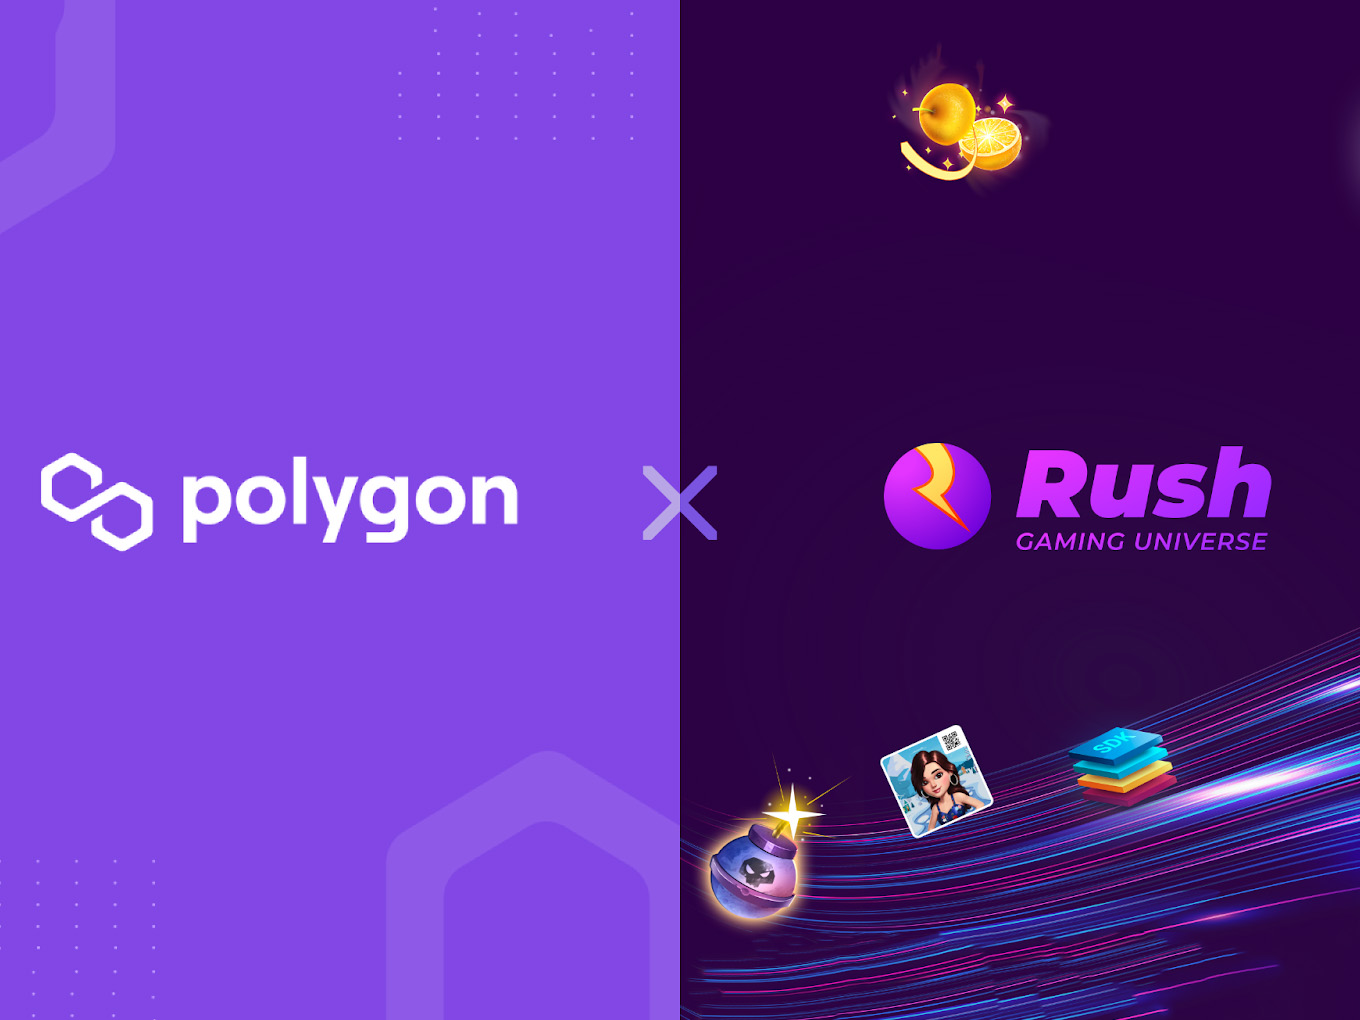 Polygon Invests In Hike’s Rush Gaming Universe To Take It To Web3 Summary The rush gaming universe is Hike’s play-to-earn (P2E) gaming platform that claims to be doing more than $50 Mn in winnings (Gross ARR) According to Mittal, CEO at Hike, players will be able to leverage smart contracts to play games, generate digital assets bad on their skill and gameplay, and become owners on the network. “The implications resulting from this model are revolutionary for gaming, particularly in an age where users spend real money on in-game assets such as in Fortnite which has generated billions in revenue,” - Kraken Intelligence Social media startup Hike has raised an undisclosed amount of investment from Ethereum layer 2 scaling solution startup Polygon to collaborate on transitioning Hike’s Rush Gaming Universe from web2 to web3 technologies.